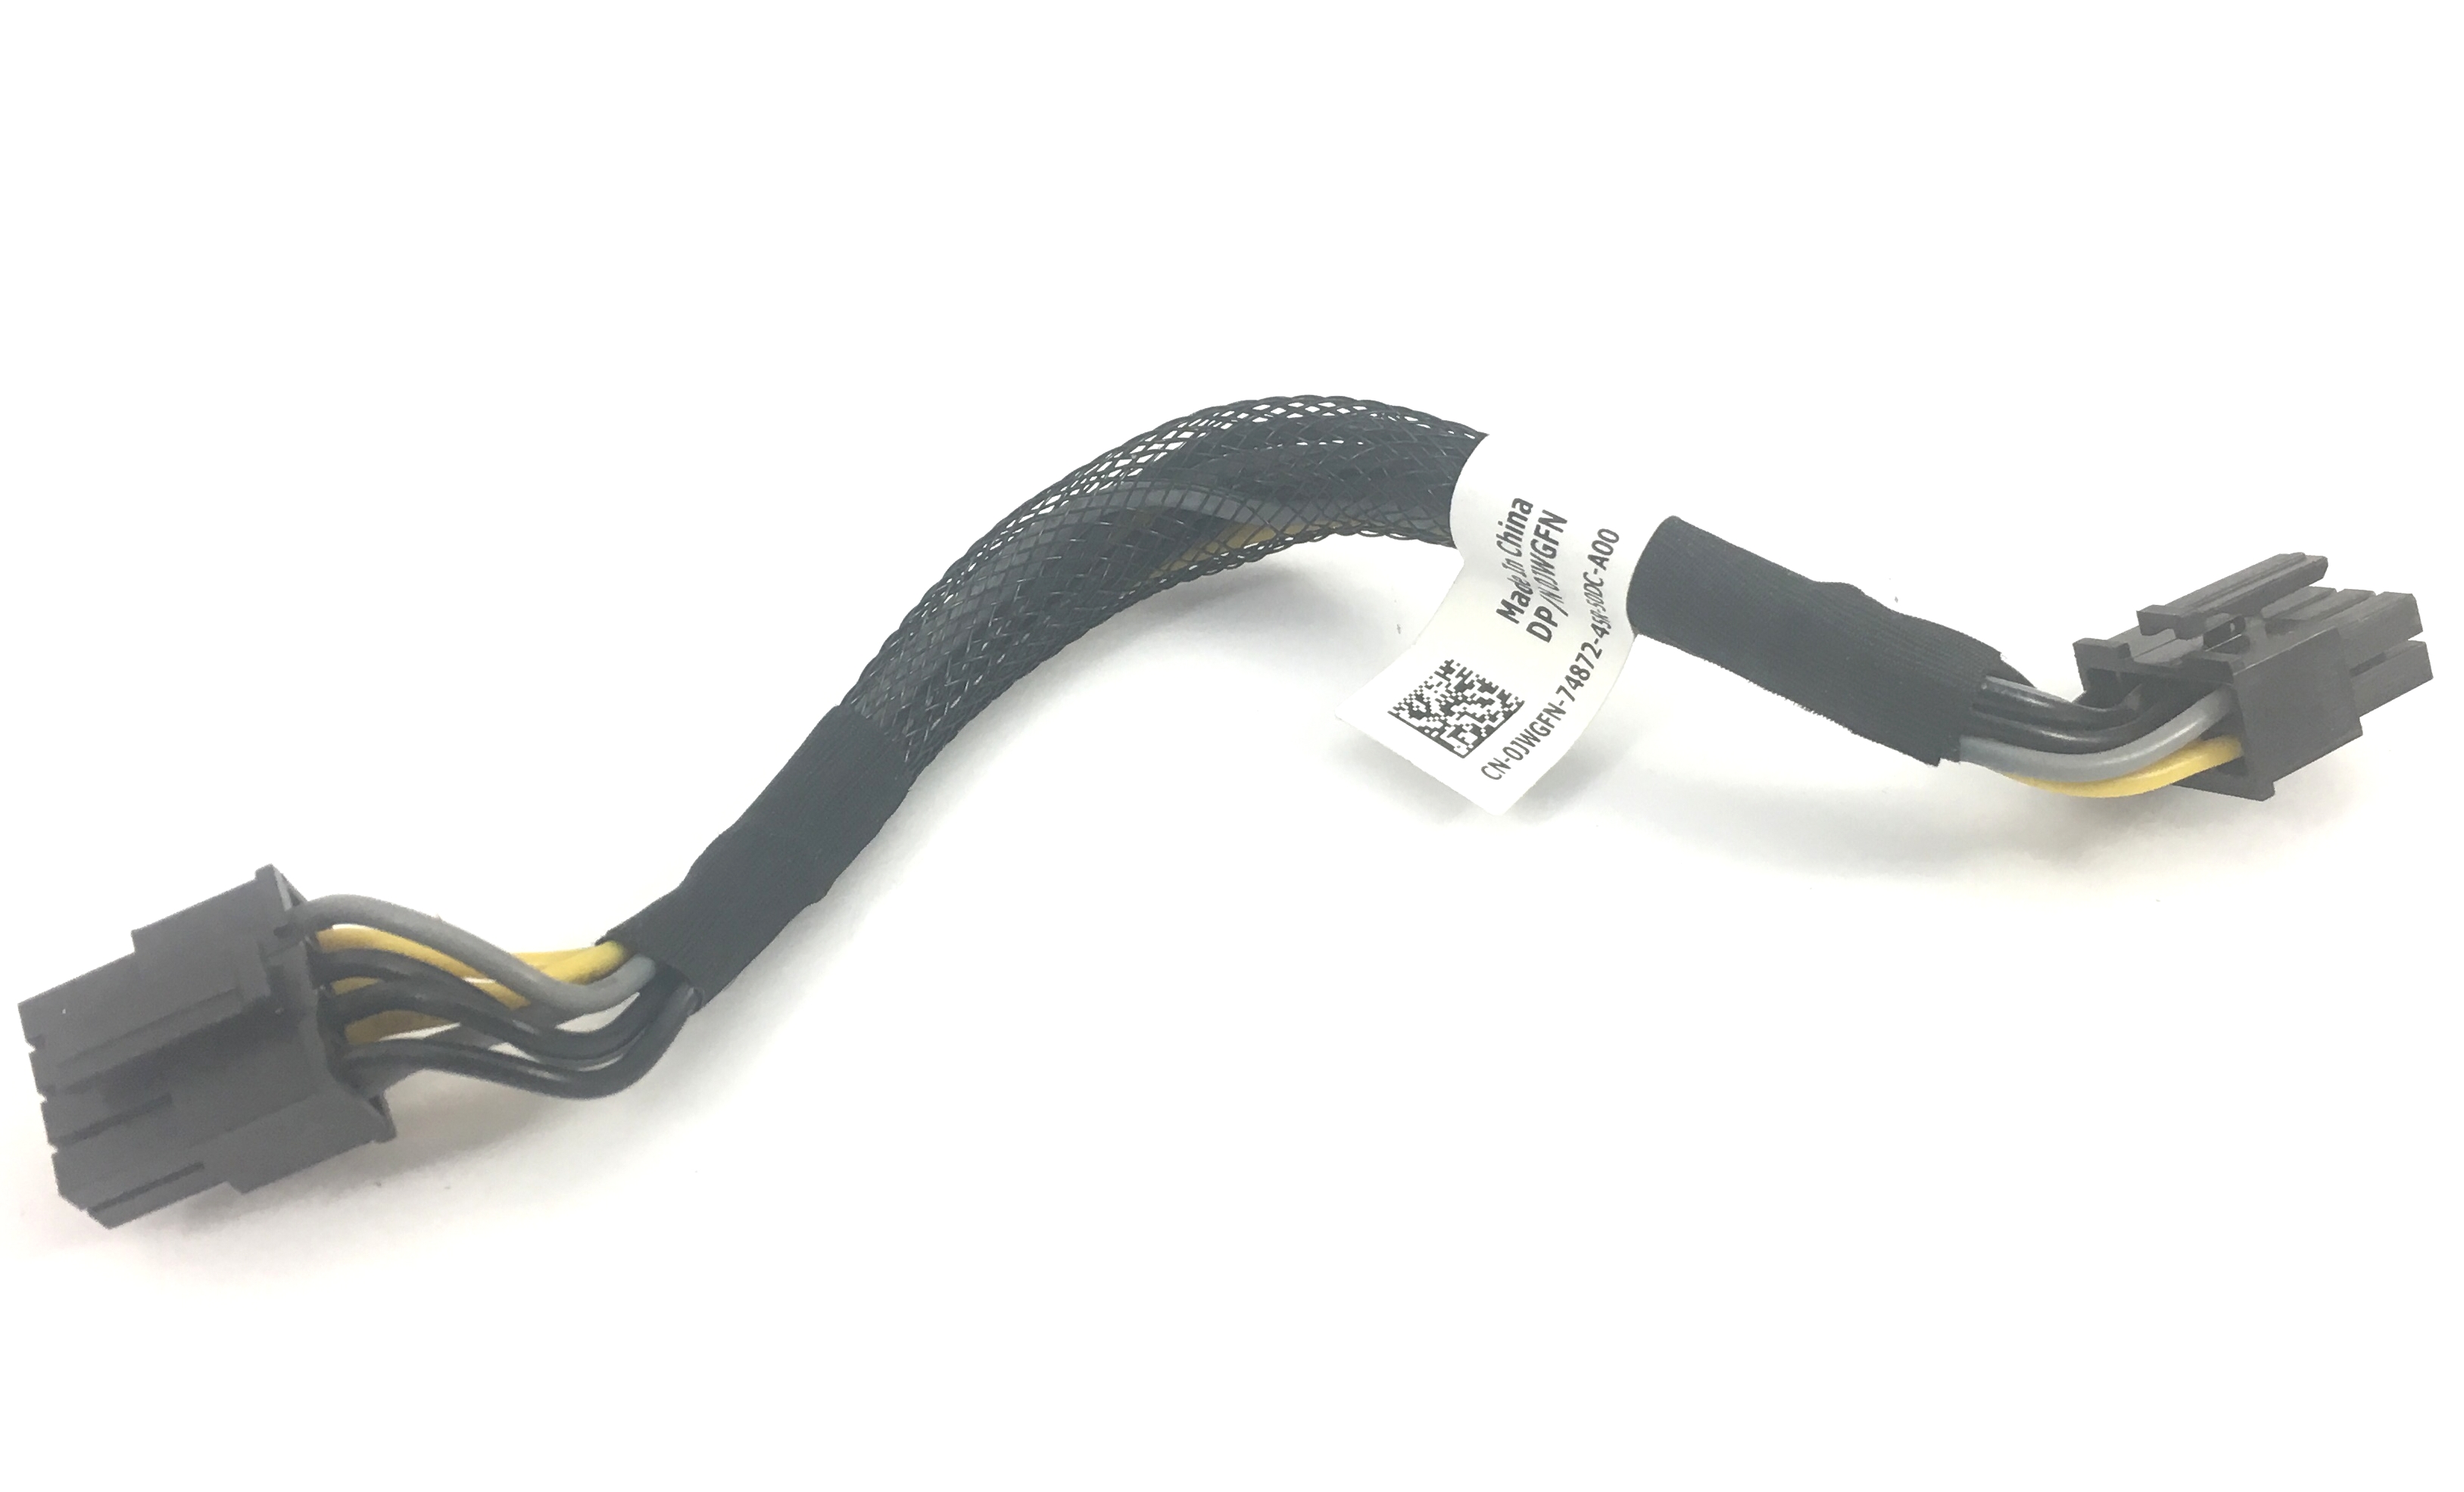 JWGFN Dell PowerEdge R720 R730 Motherboard To Backplane Power Cable (JWGFN)